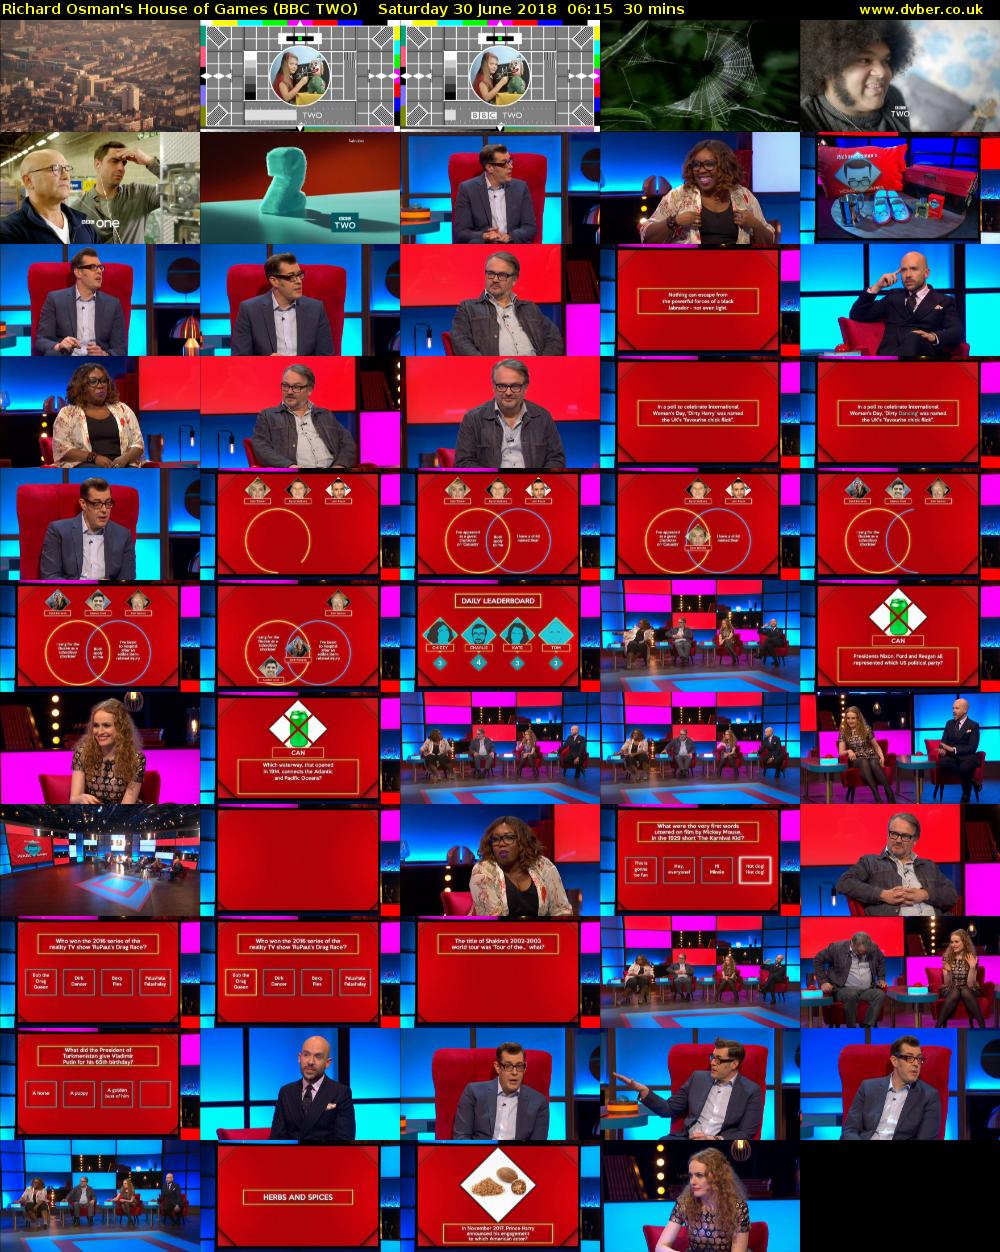 Richard Osman's House of Games (BBC TWO) Saturday 30 June 2018 06:15 - 06:45